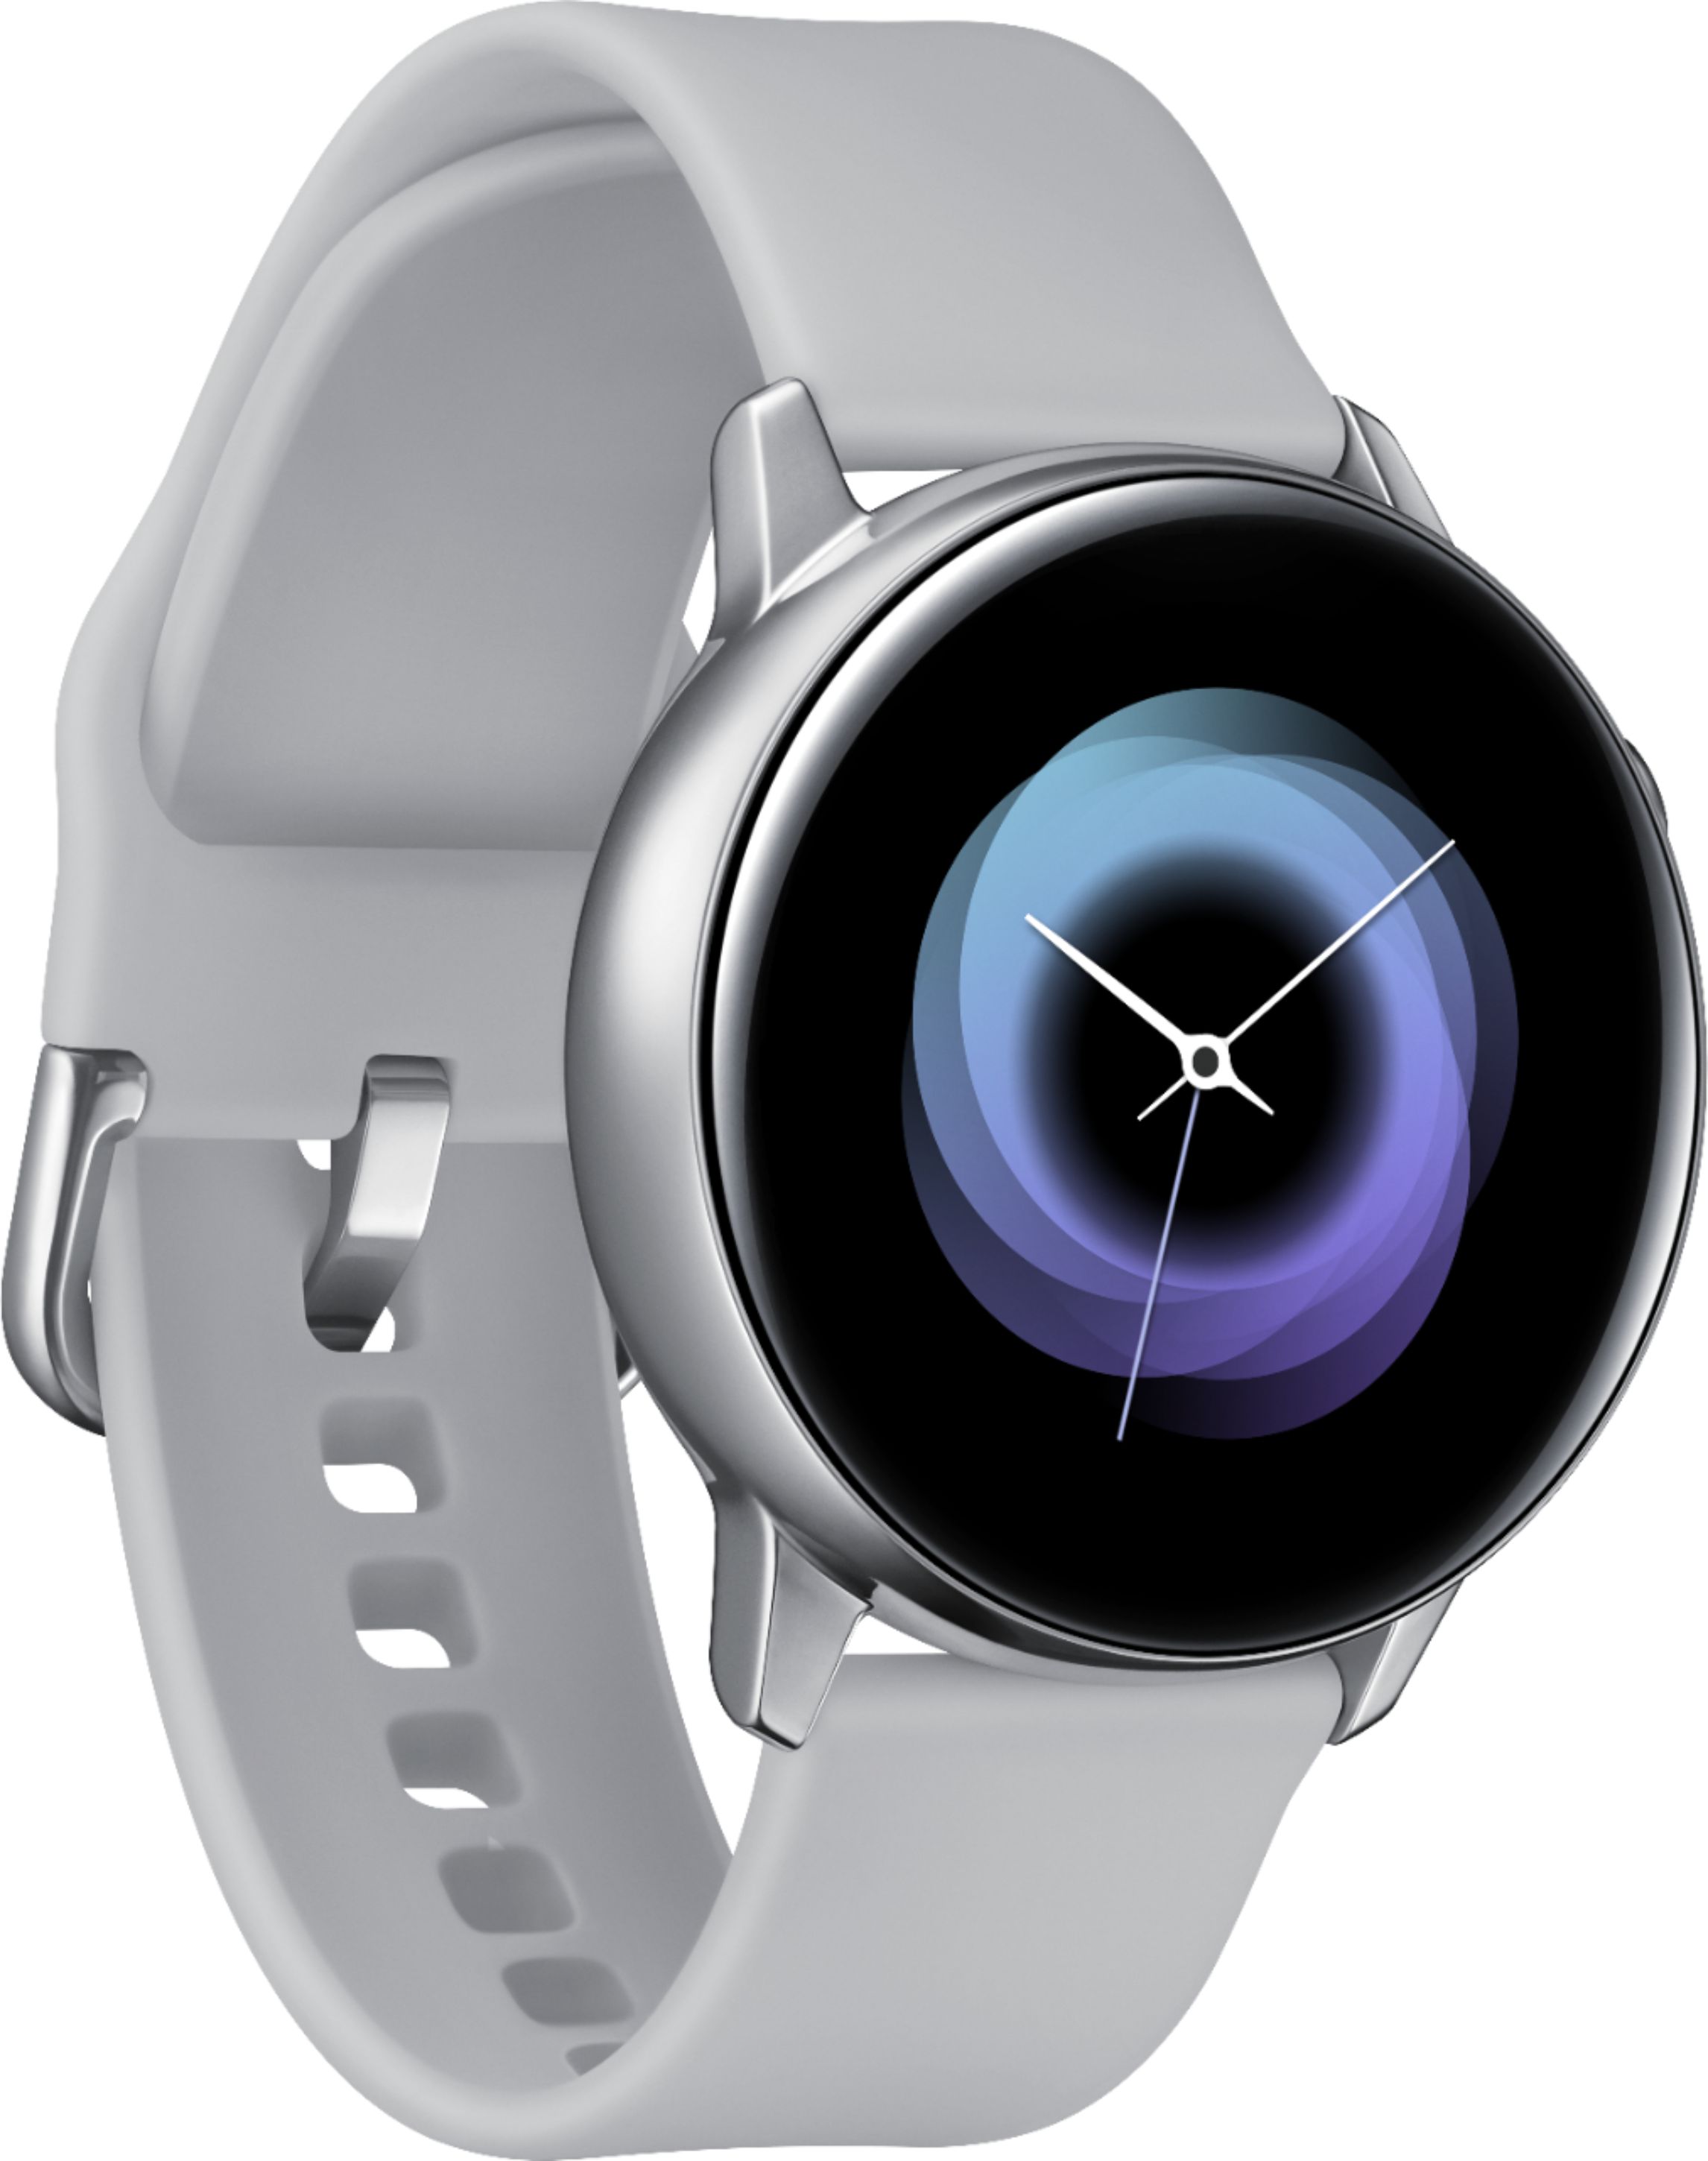 Angle View: Samsung - Galaxy Watch Active Smartwatch 40mm Aluminum - Silver